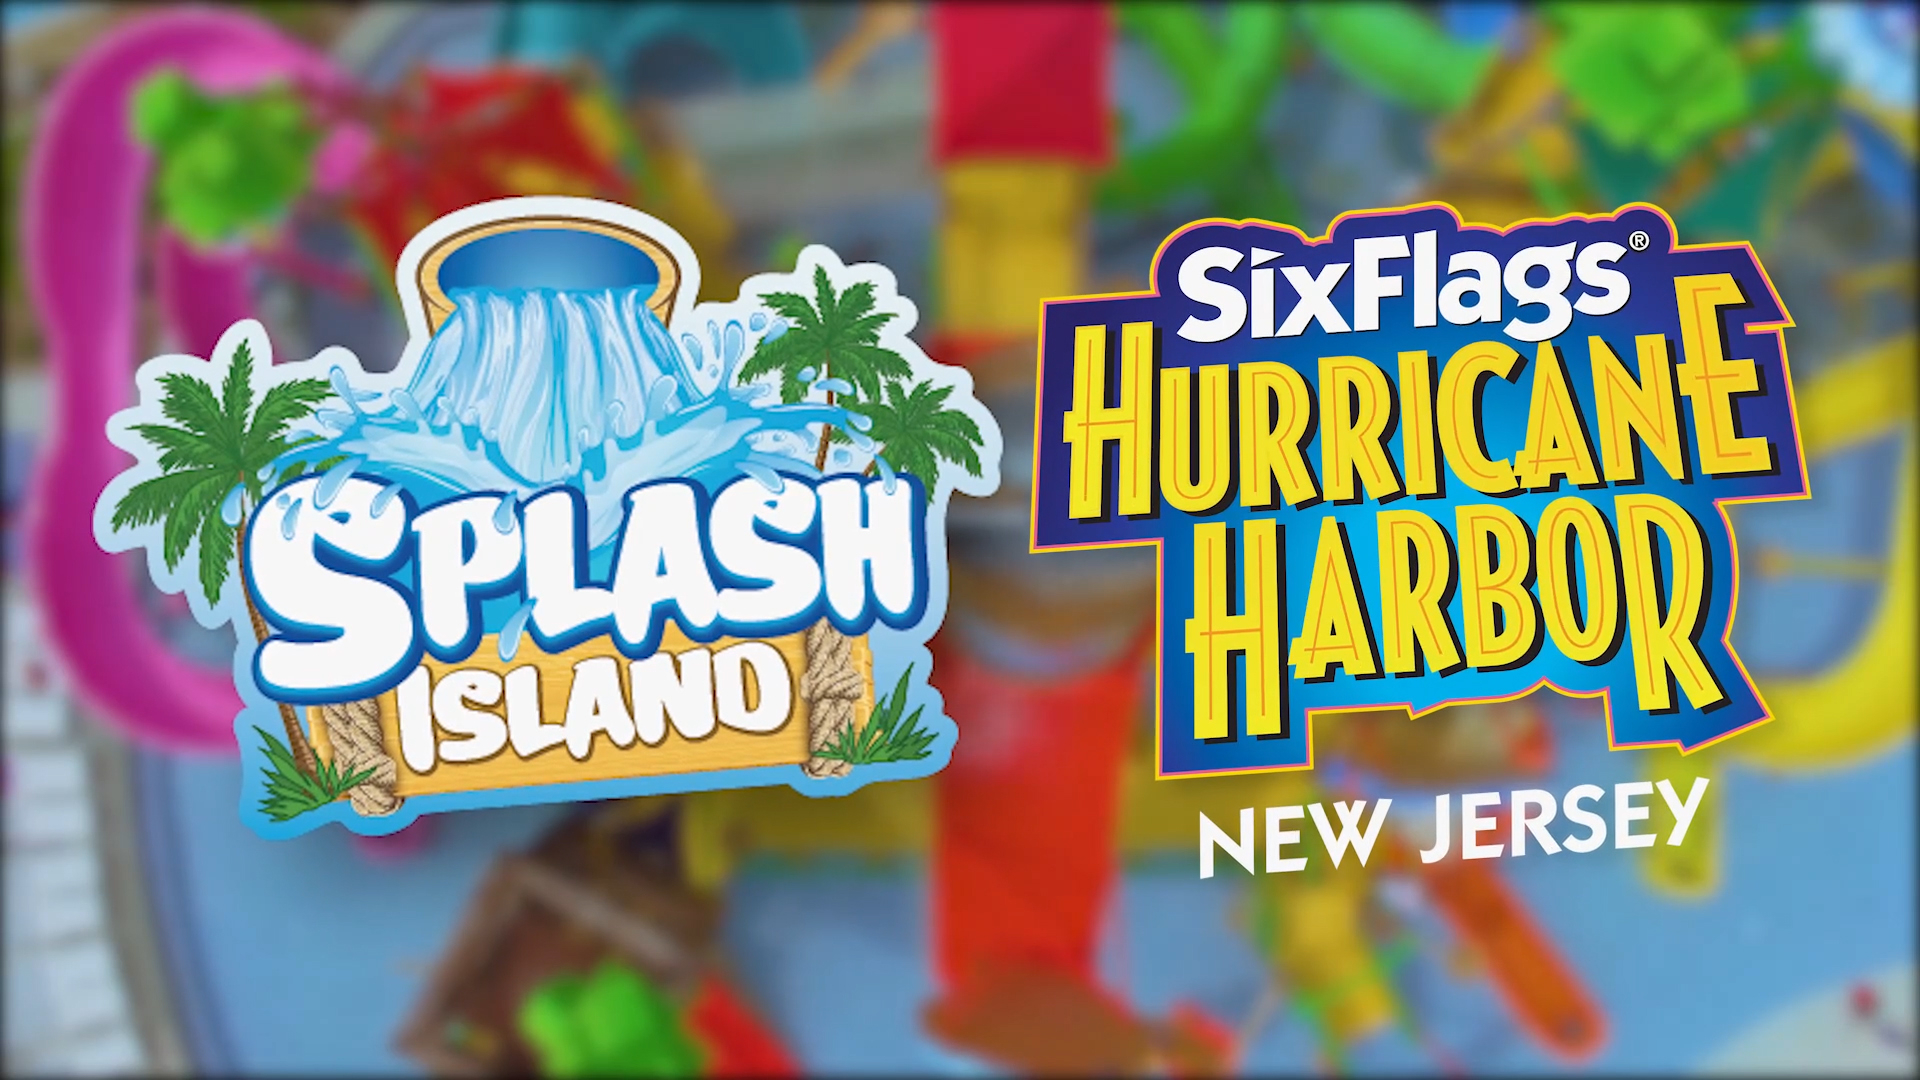 Six Flags Hurricane Harbor unveils largest investment in more than two decades. The area will include a tree house play structure and fourteen new kids’ slides.